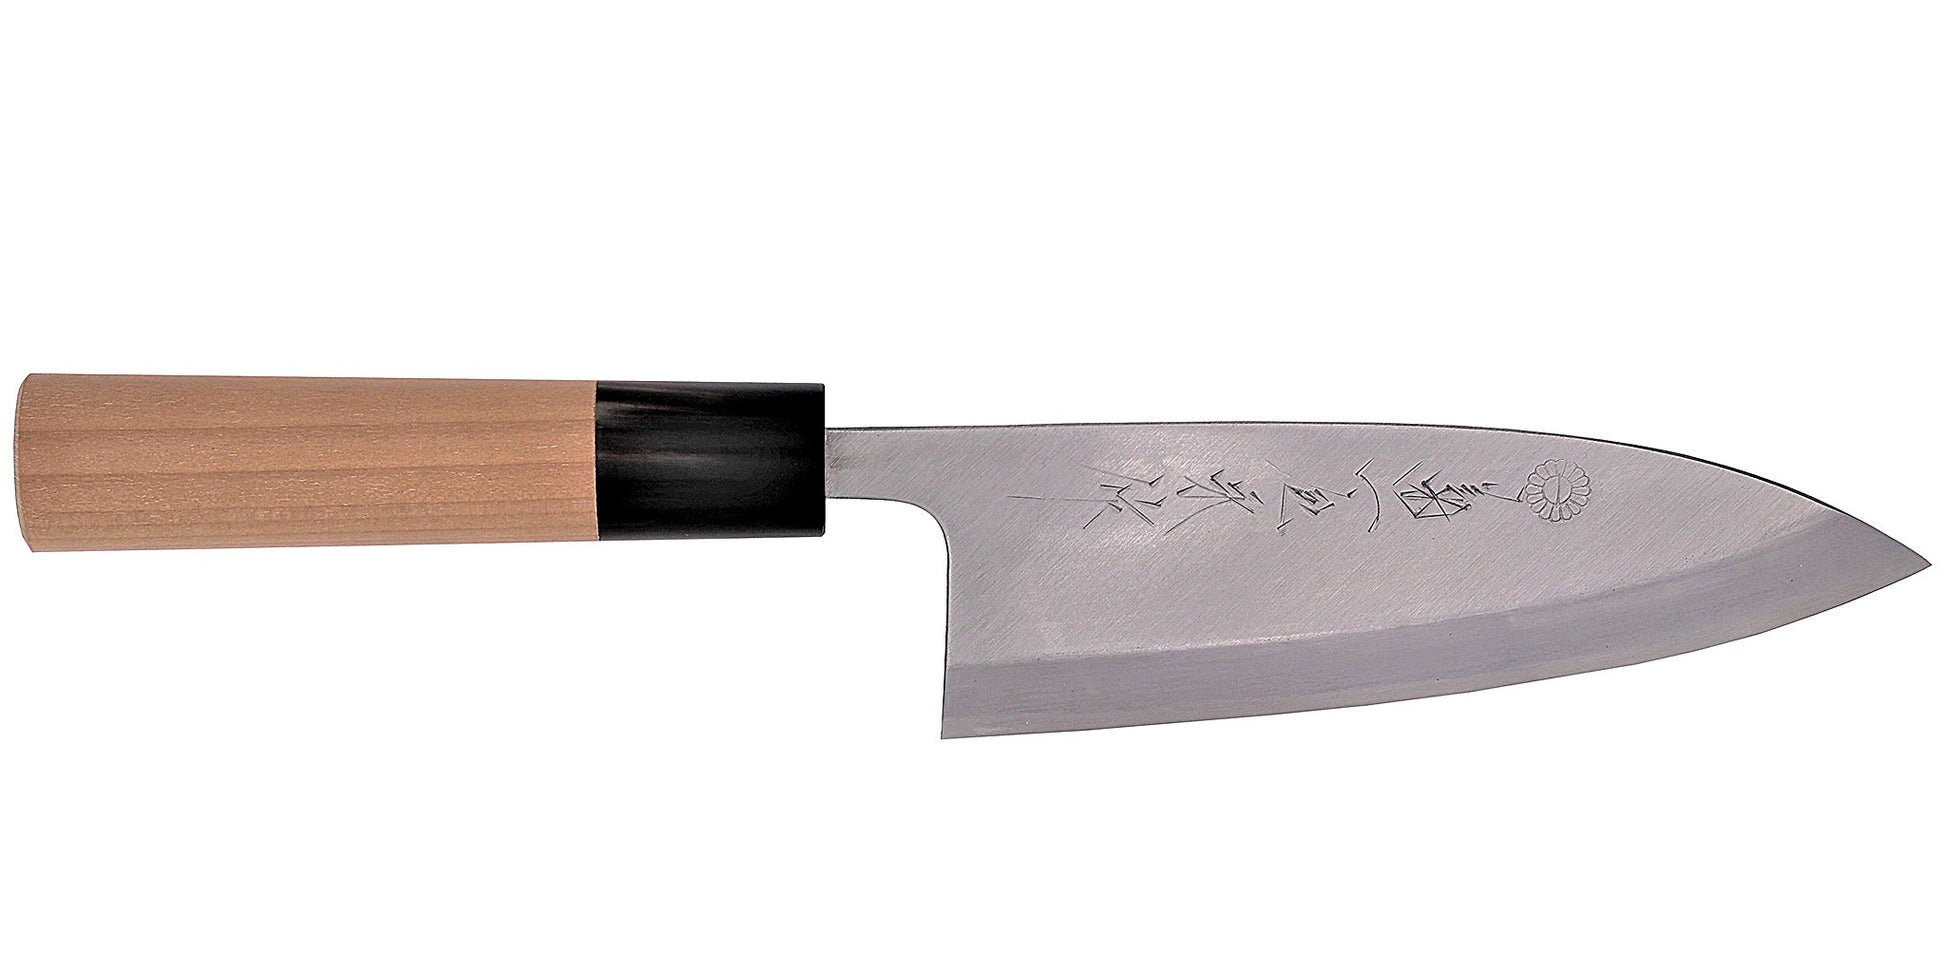 Kikuichi Cutlery Kasumitogi Series Deba. Traditional Japanese boning knife for fish made of white #3 carbon steel.  Available in sizes 10 cm, 12 cm, 13 cm, 15 cm, 18 cm, 19 cm, 21 cm, and 24 cm. 